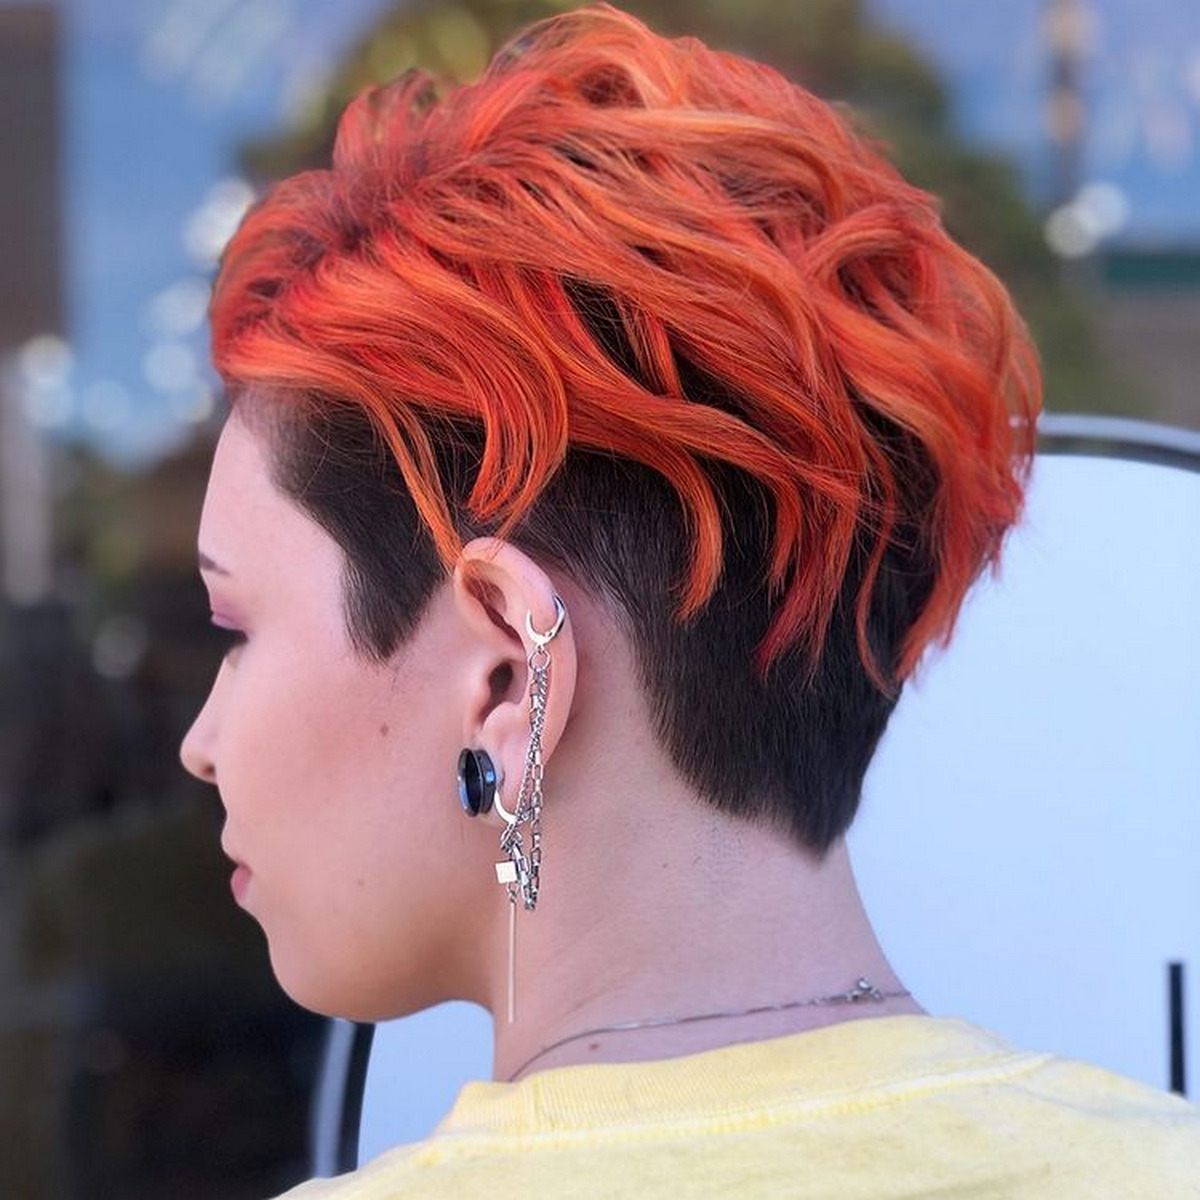 Pixie Undercut with Red Curly Bangs